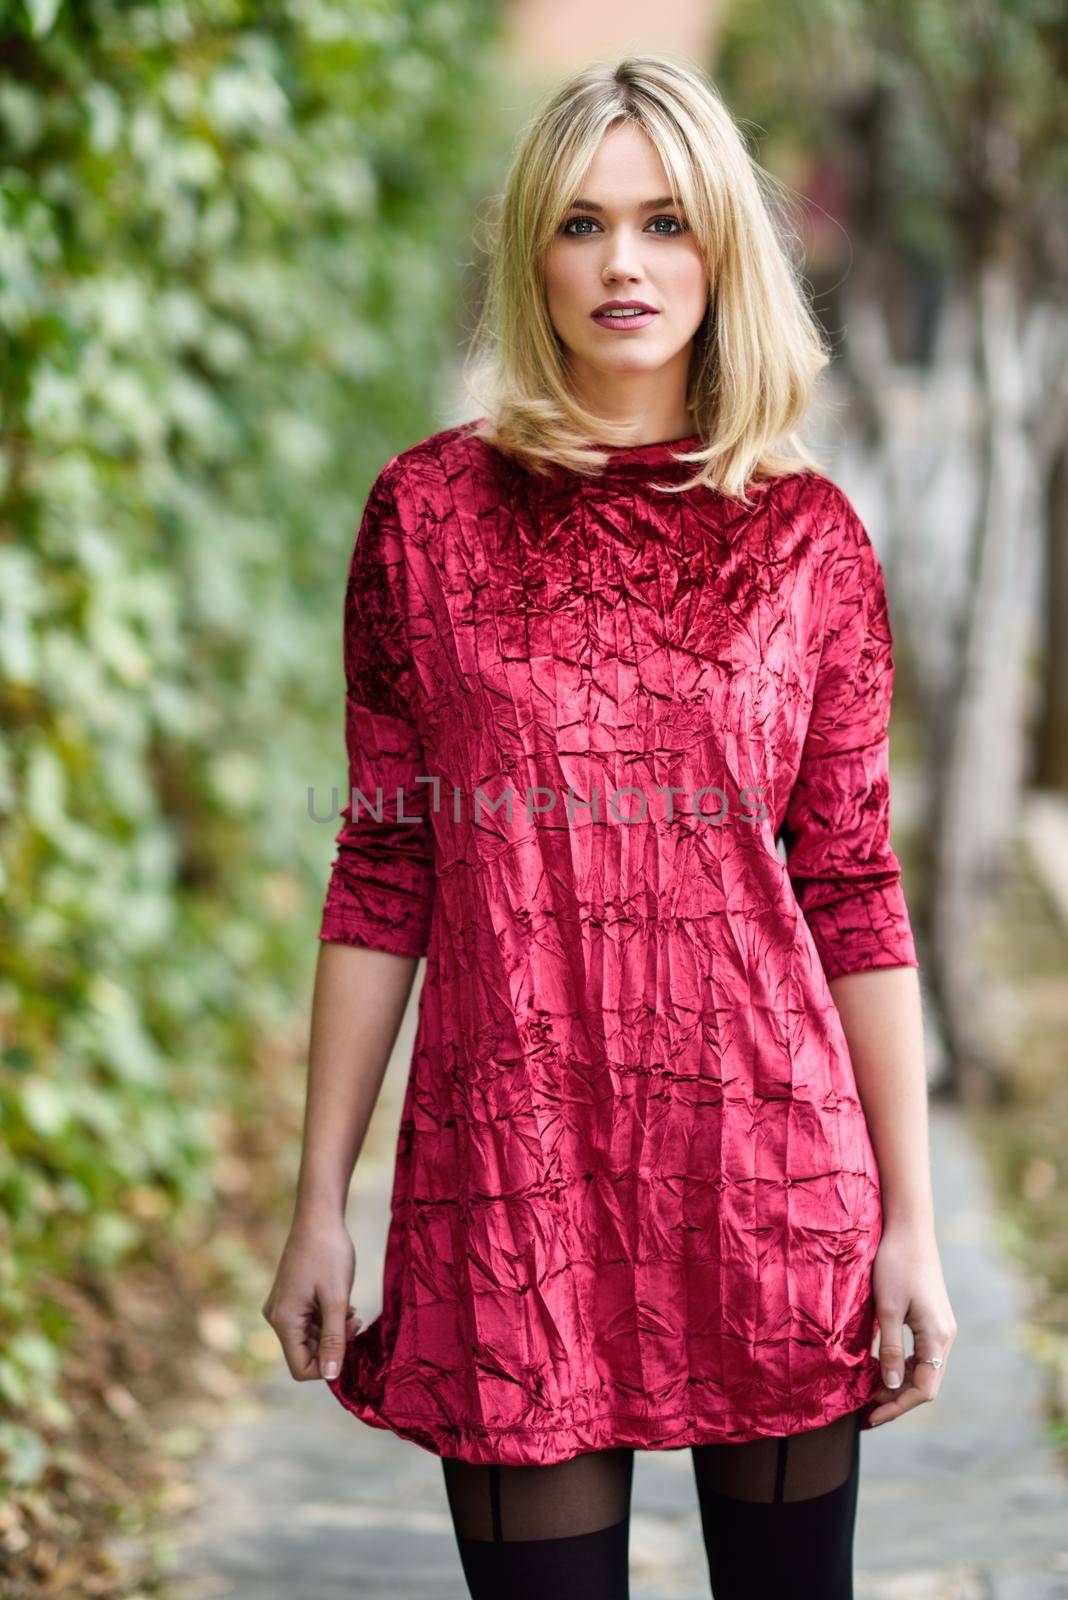 Beautiful blonde woman in green leaves background. Young girl wearing red dress standing in the street. Pretty female with frizzy hairstyle and blue eyes.